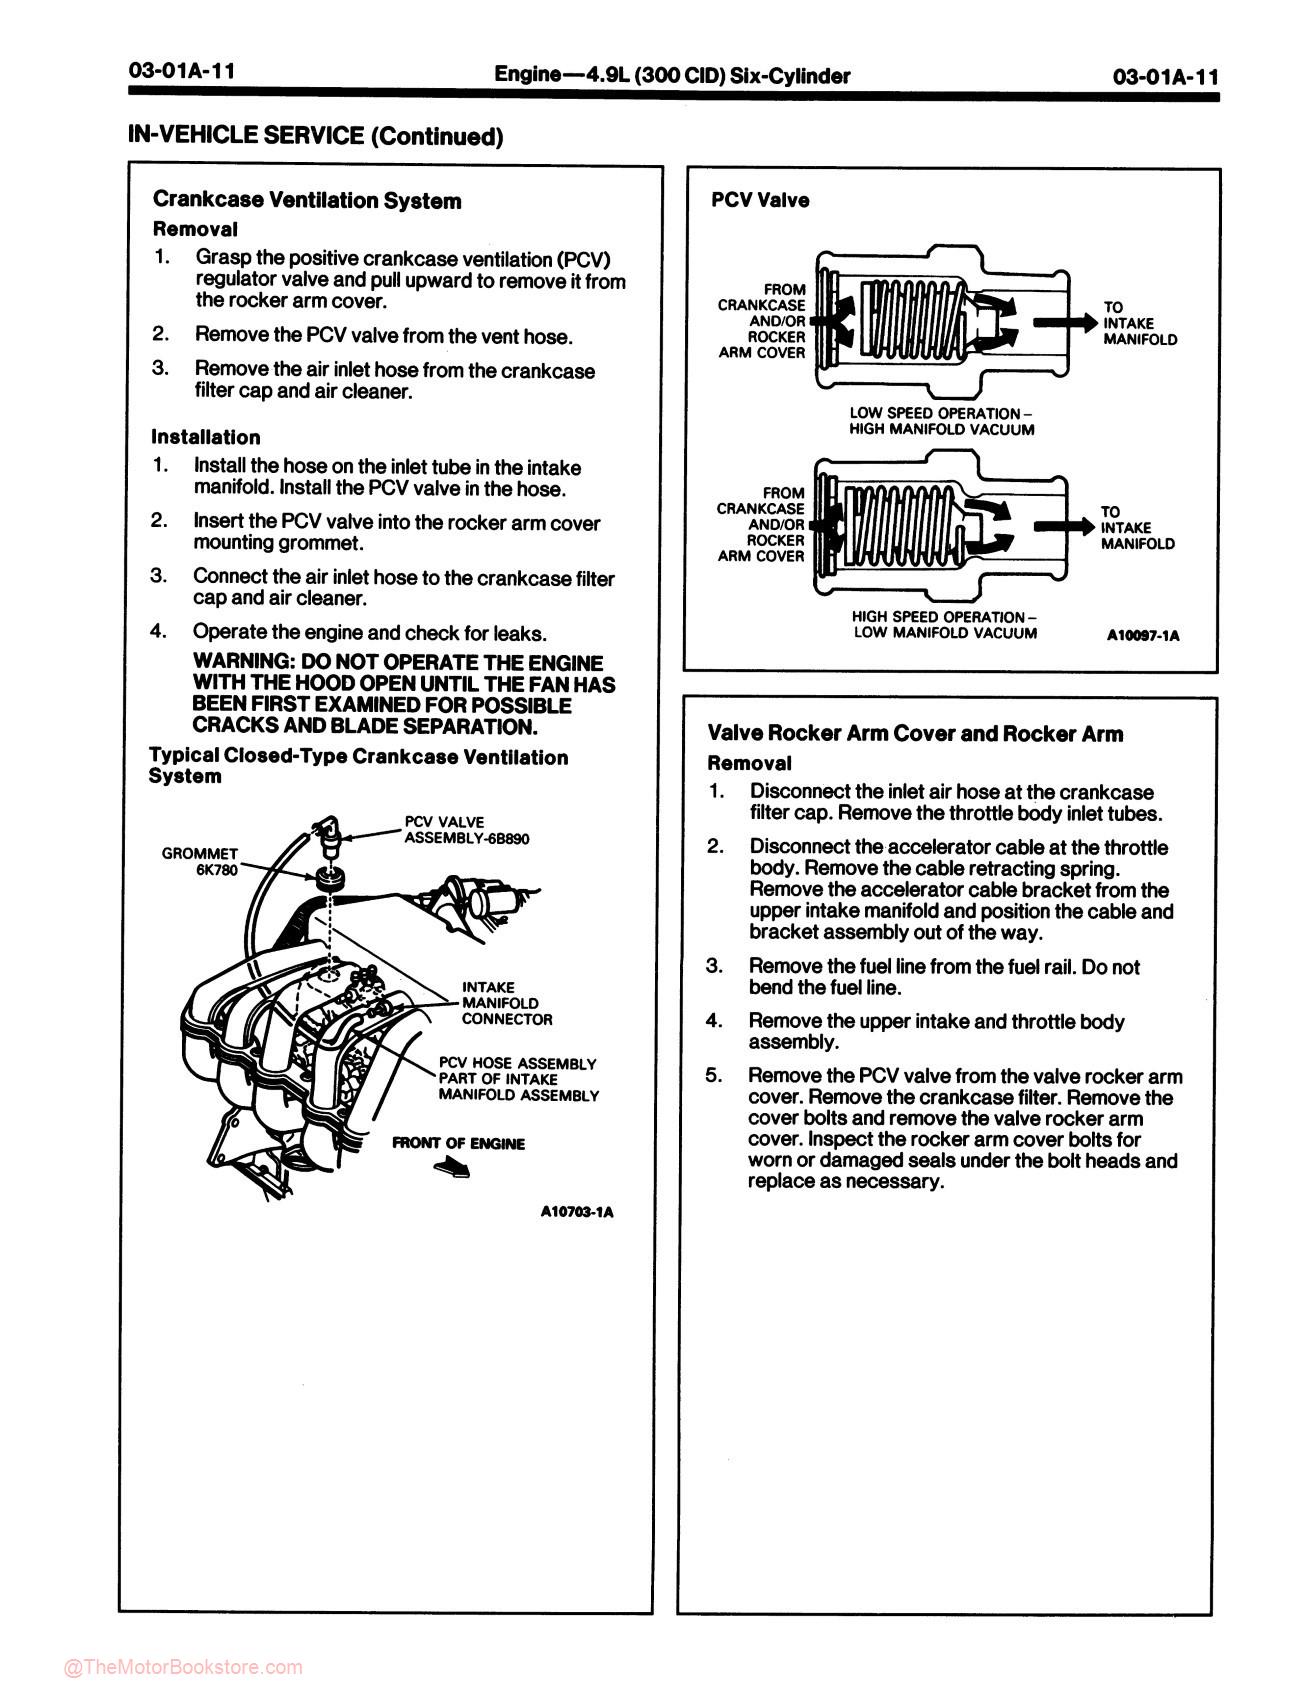 1991 Ford Truck, Bronco, Econoline Shop Manual - F-Series - Sample Page 4